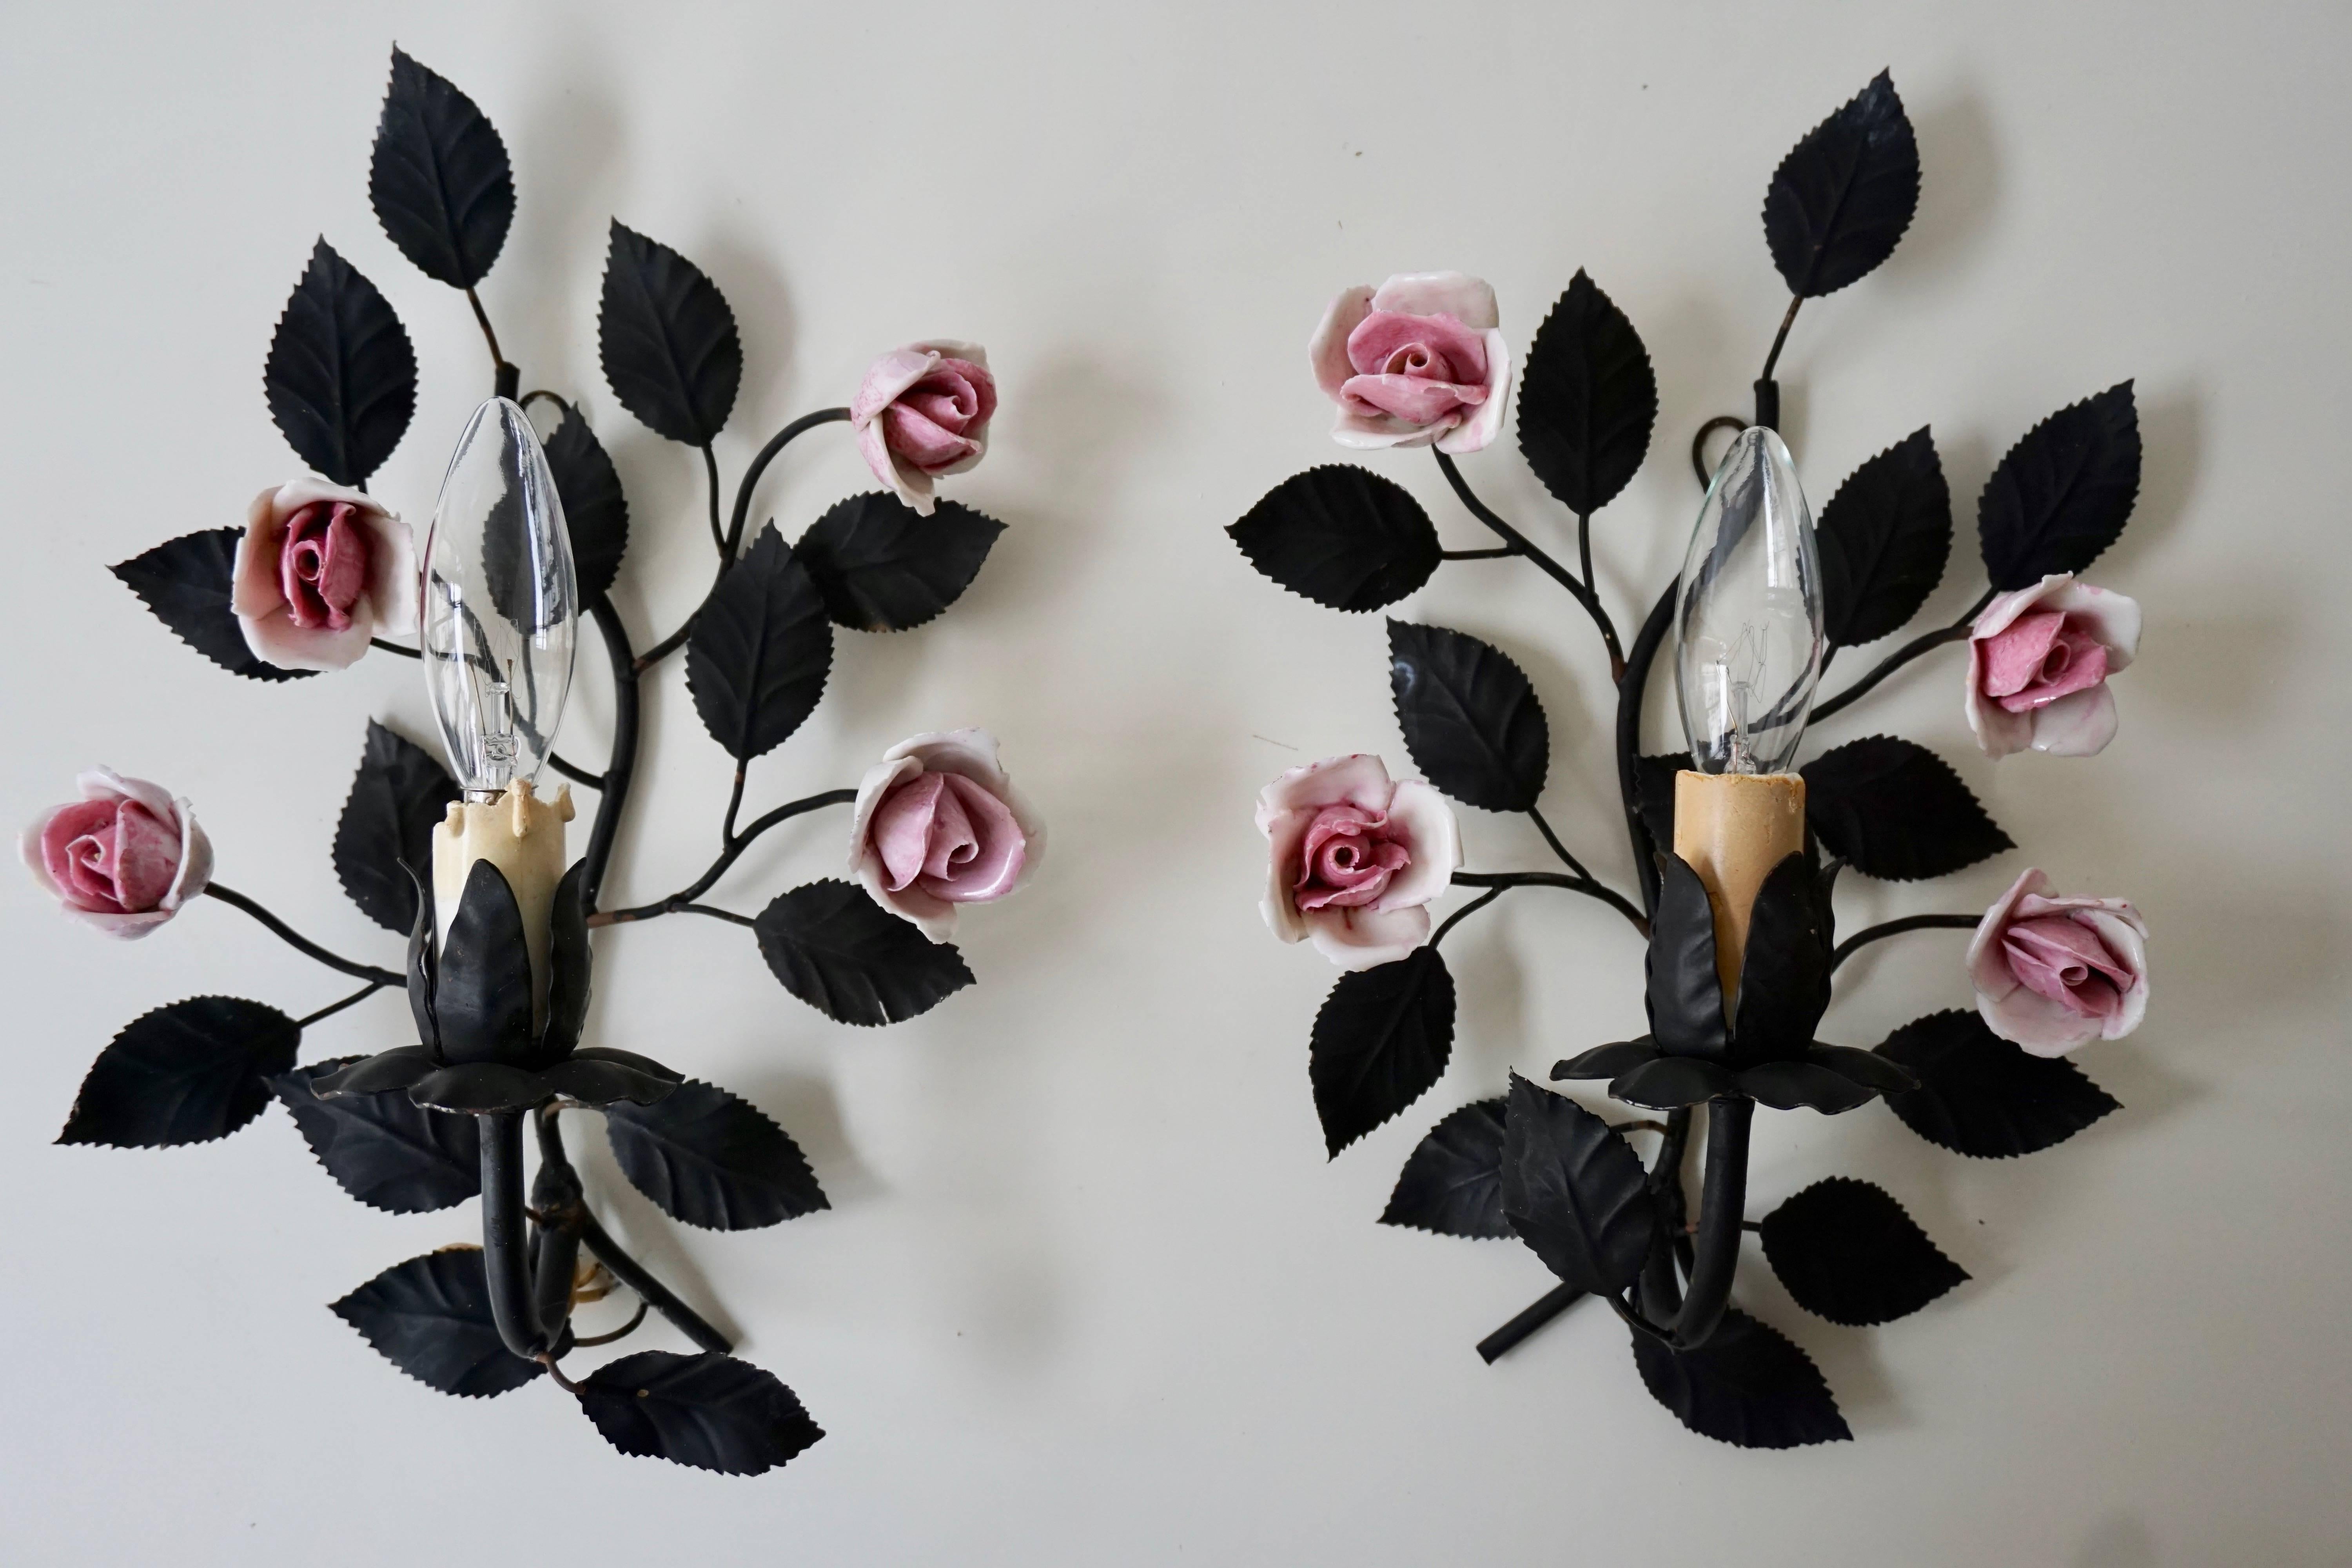 Four wall sconces in metal with porcelain flowers.
Measures: Height 30 cm.
Width 20 cm.
Depth 12 cm.